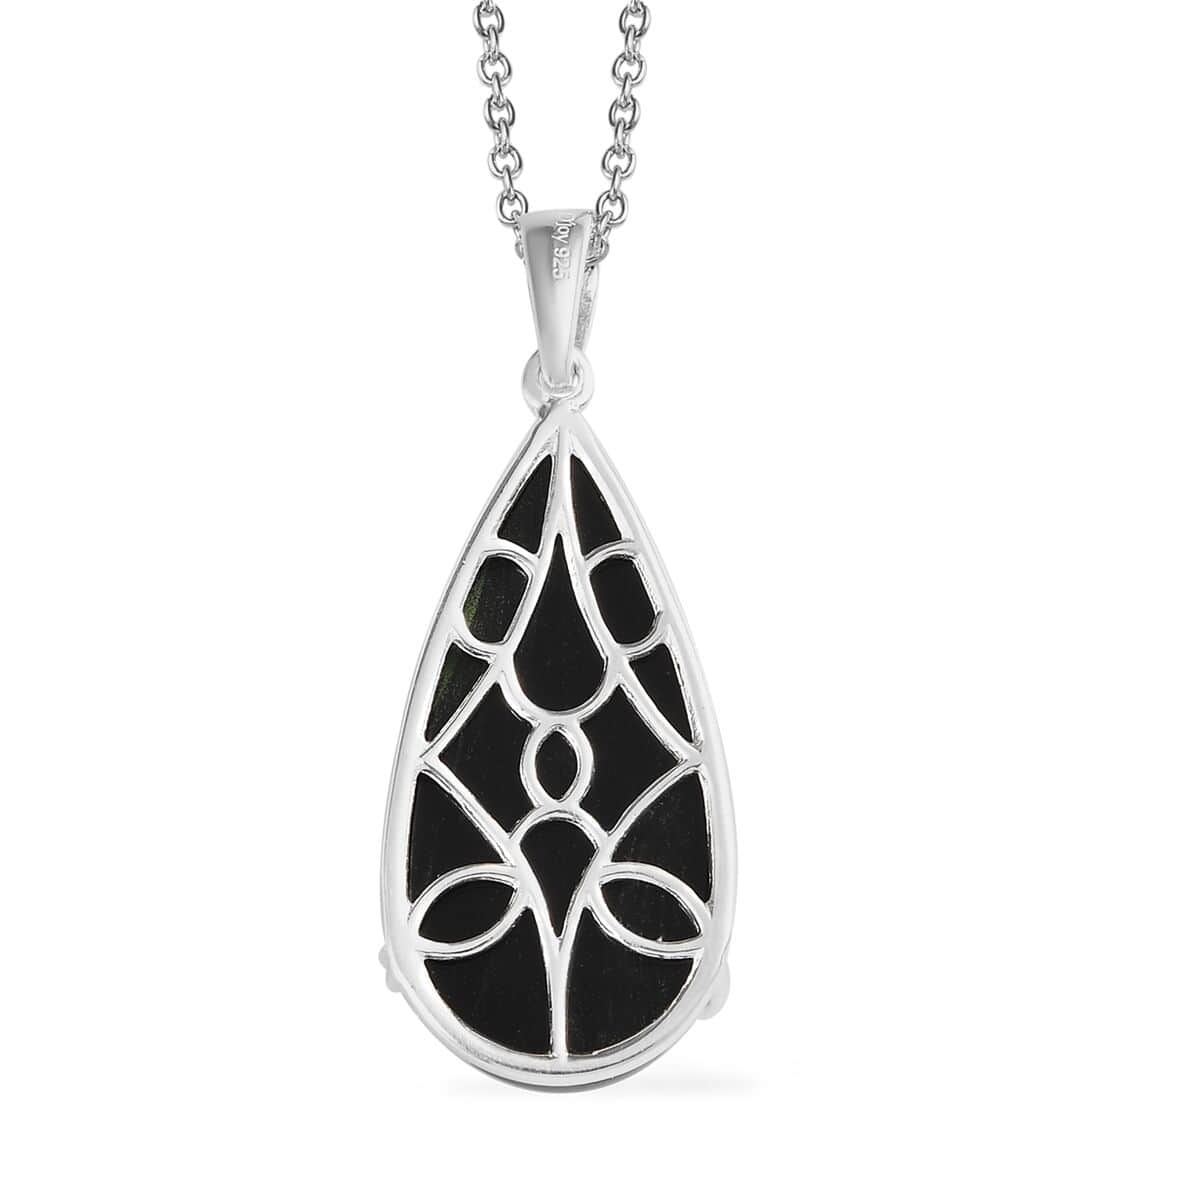 Black Onyx Pendant Necklace 20 Inches in Sterling Silver, Black Teardrop Pendant Necklaces for Women, Silver Boho Pendant - December Birthstone Necklace with Stainless Steel Chain 20 Inches 20.00 ctw image number 6